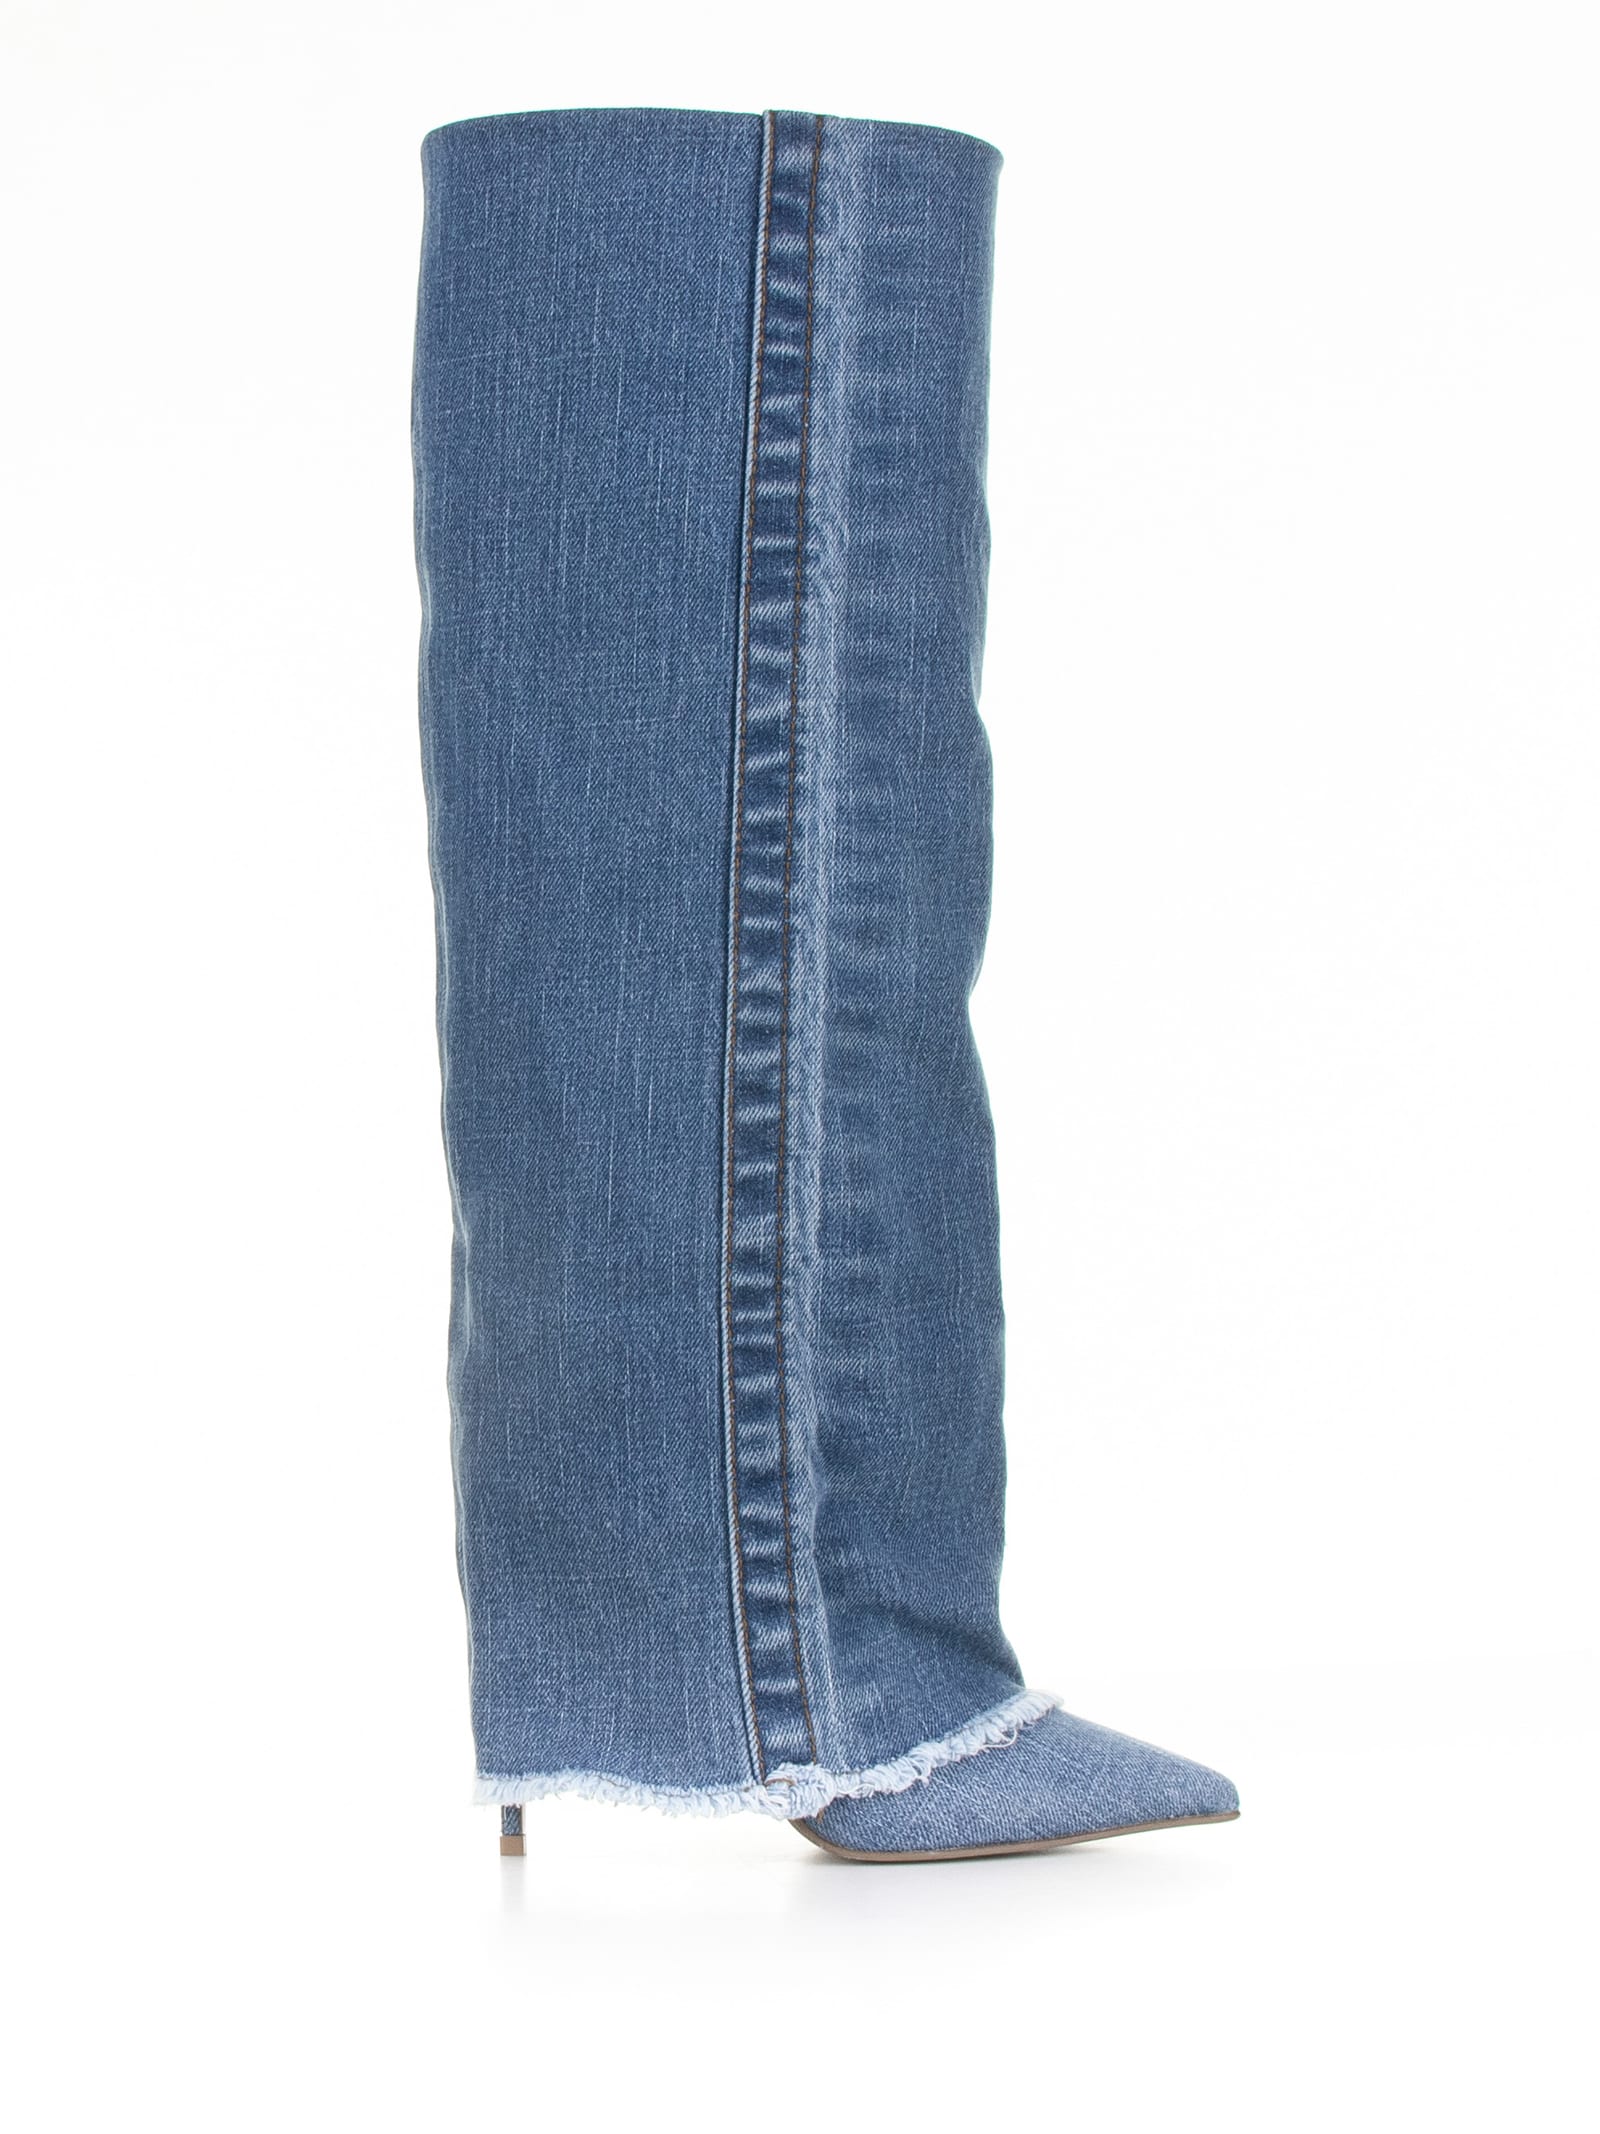 Le Silla Andy Boot With Cuff In Blue Denim In Jeans